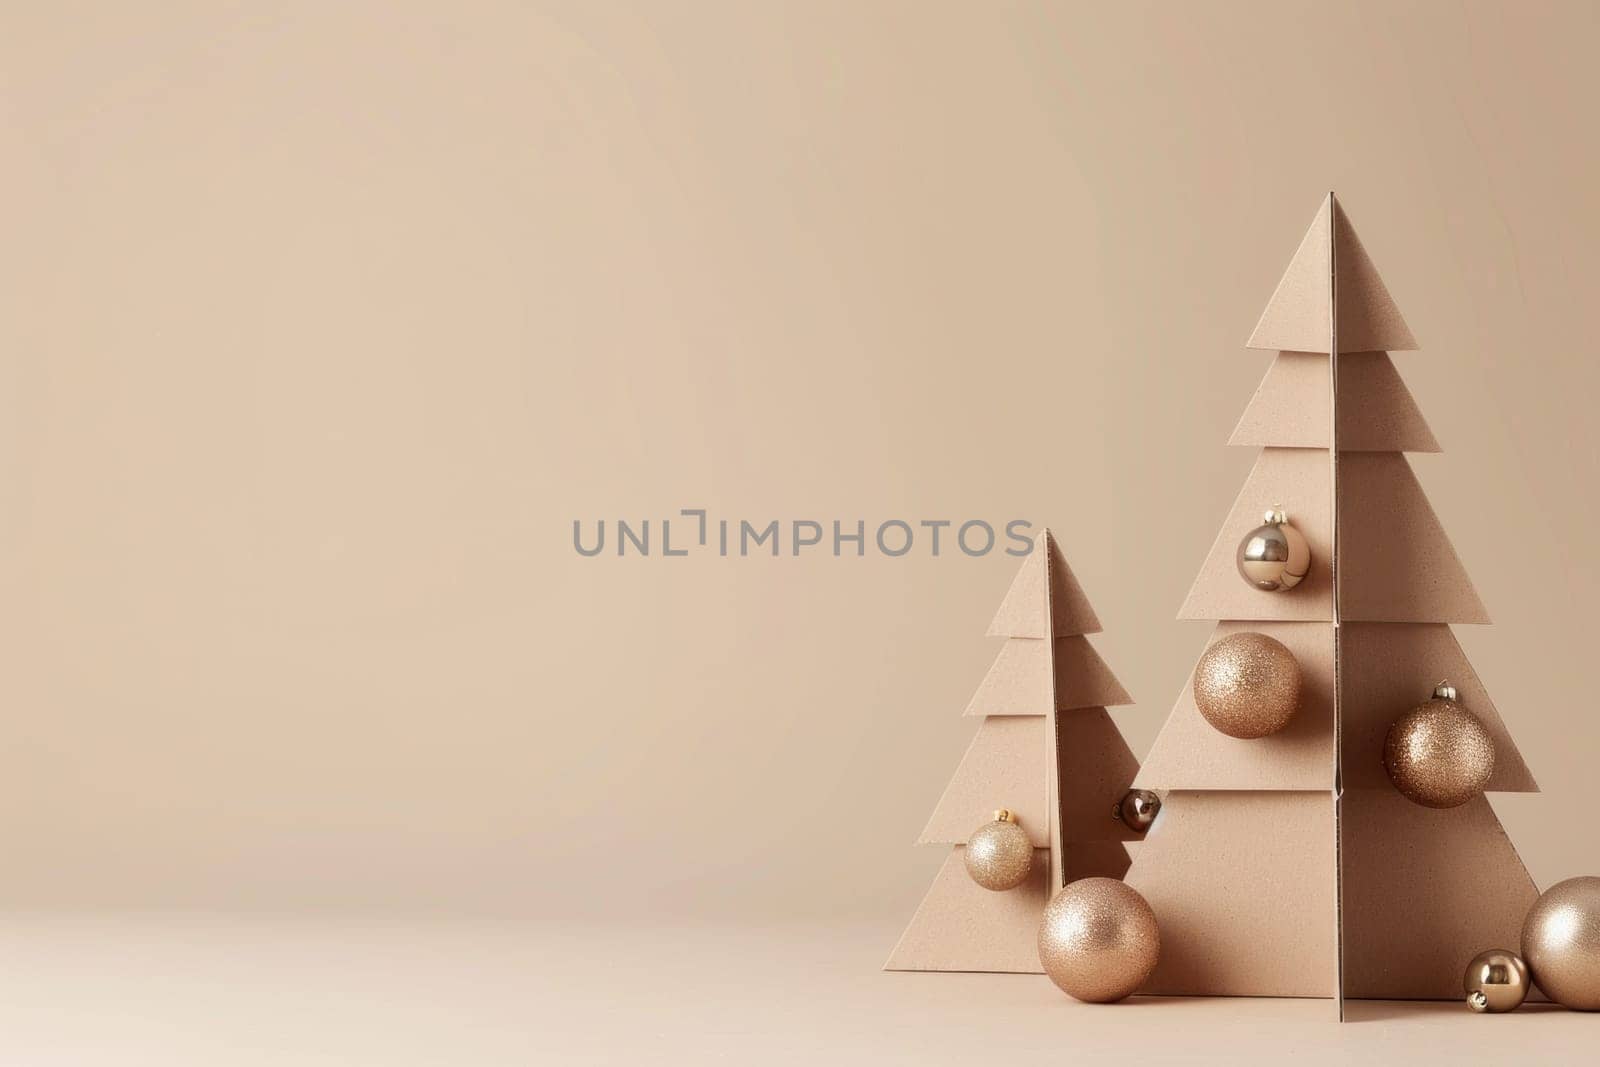 Cardboard christmas tree on beige background in 3d for winter holiday season celebration and home decoration